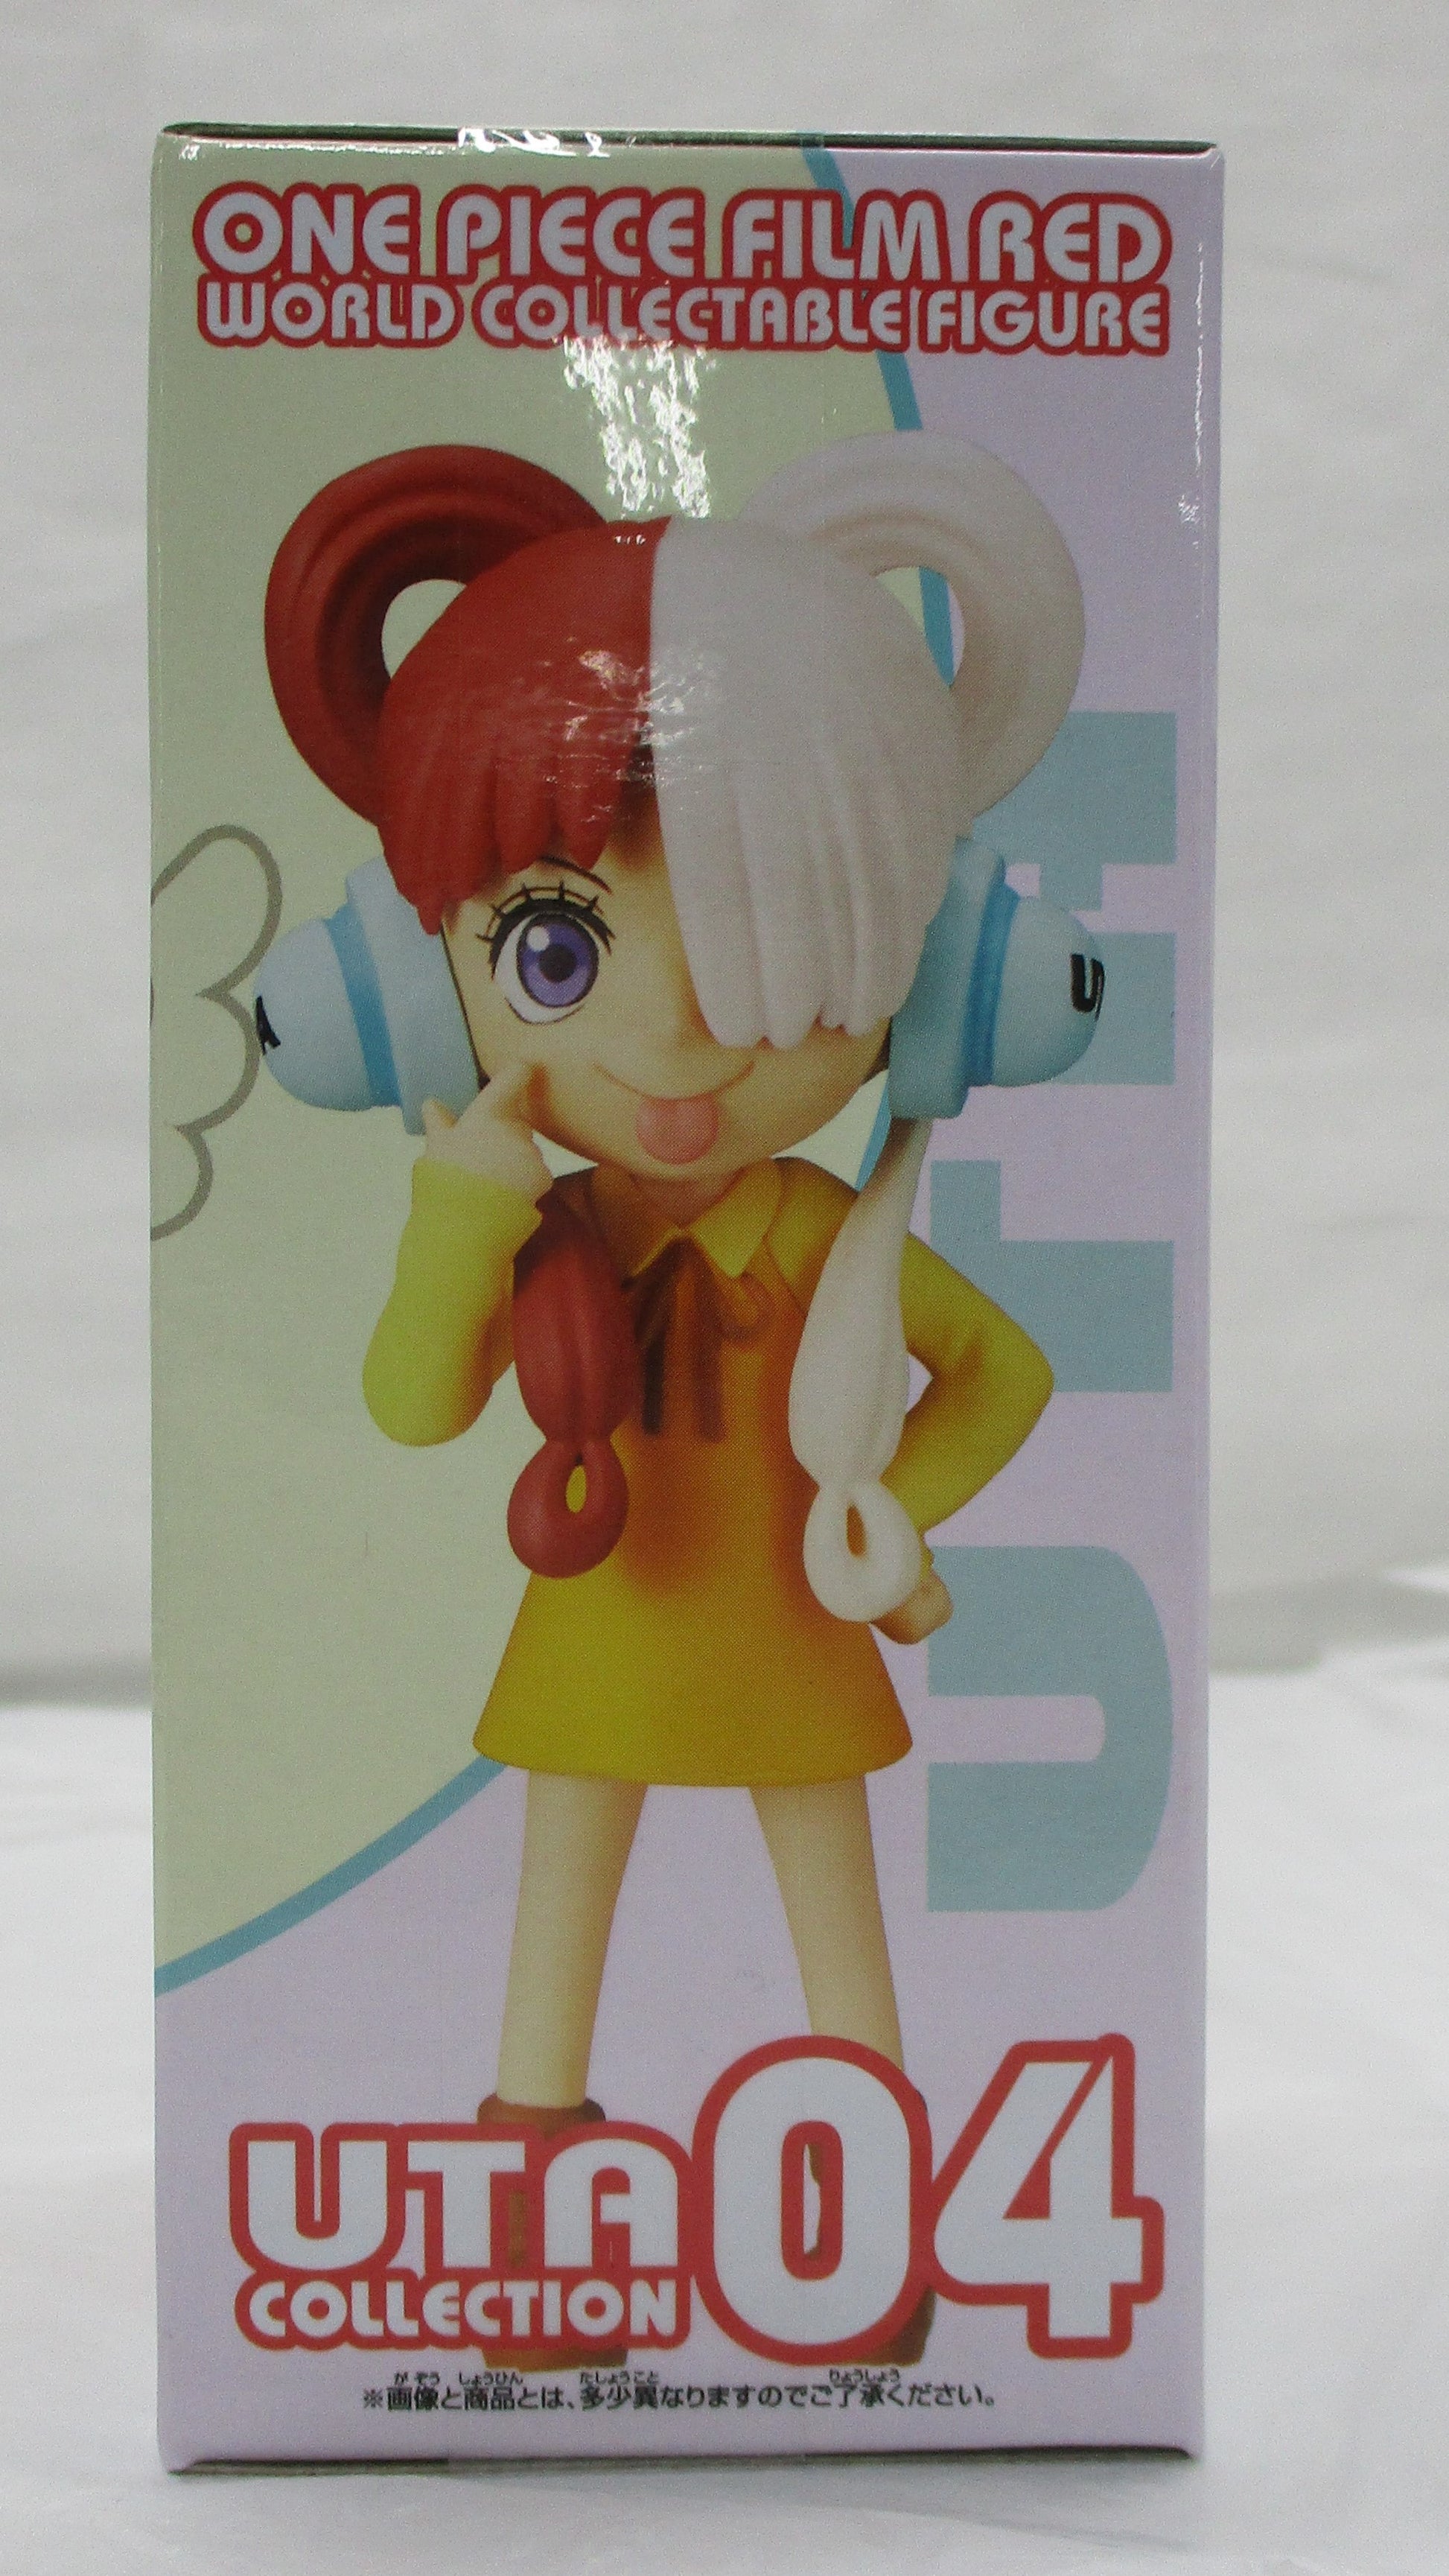 ONE PIECE ”ONE PIECE FILM RED” World Collectable Figure -UTA COLLECTION- 04, animota